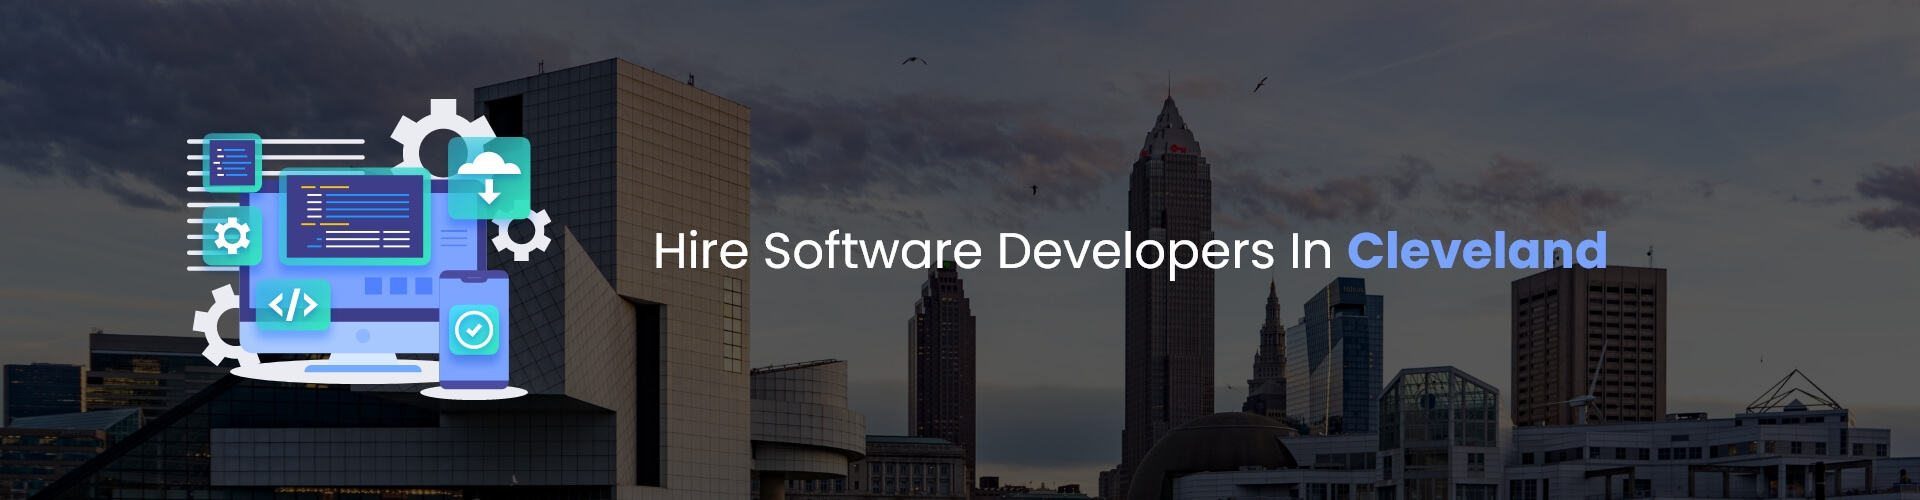 hire software developers in cleveland